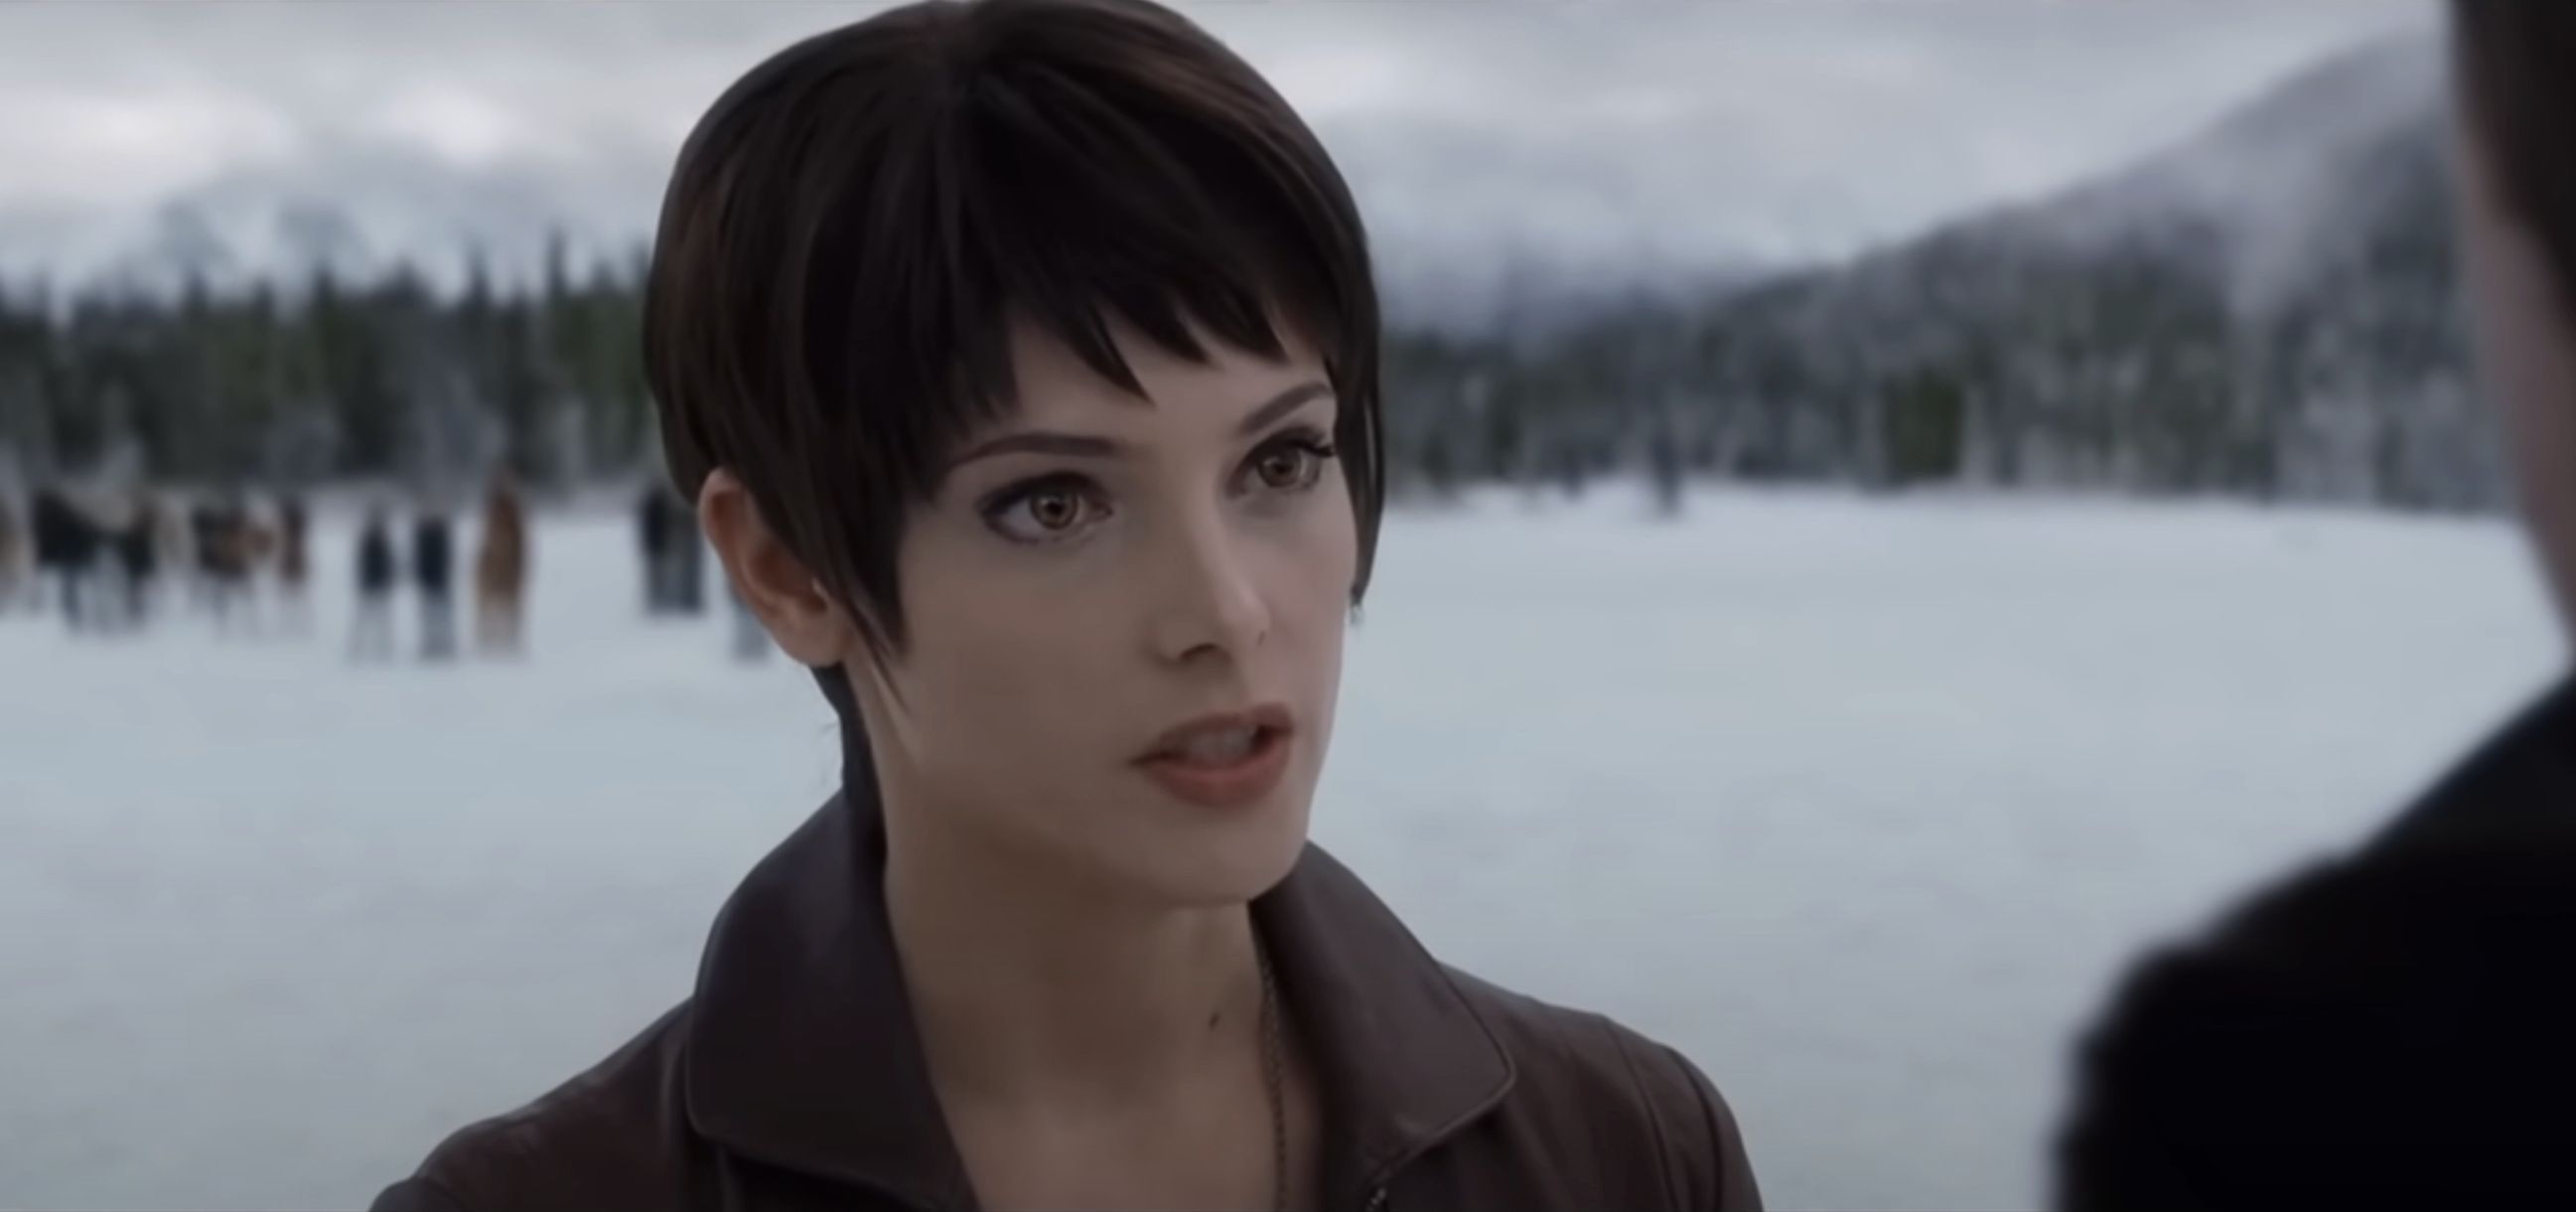 Alice Cullen from Twilight stands in a snowy setting, facing another character